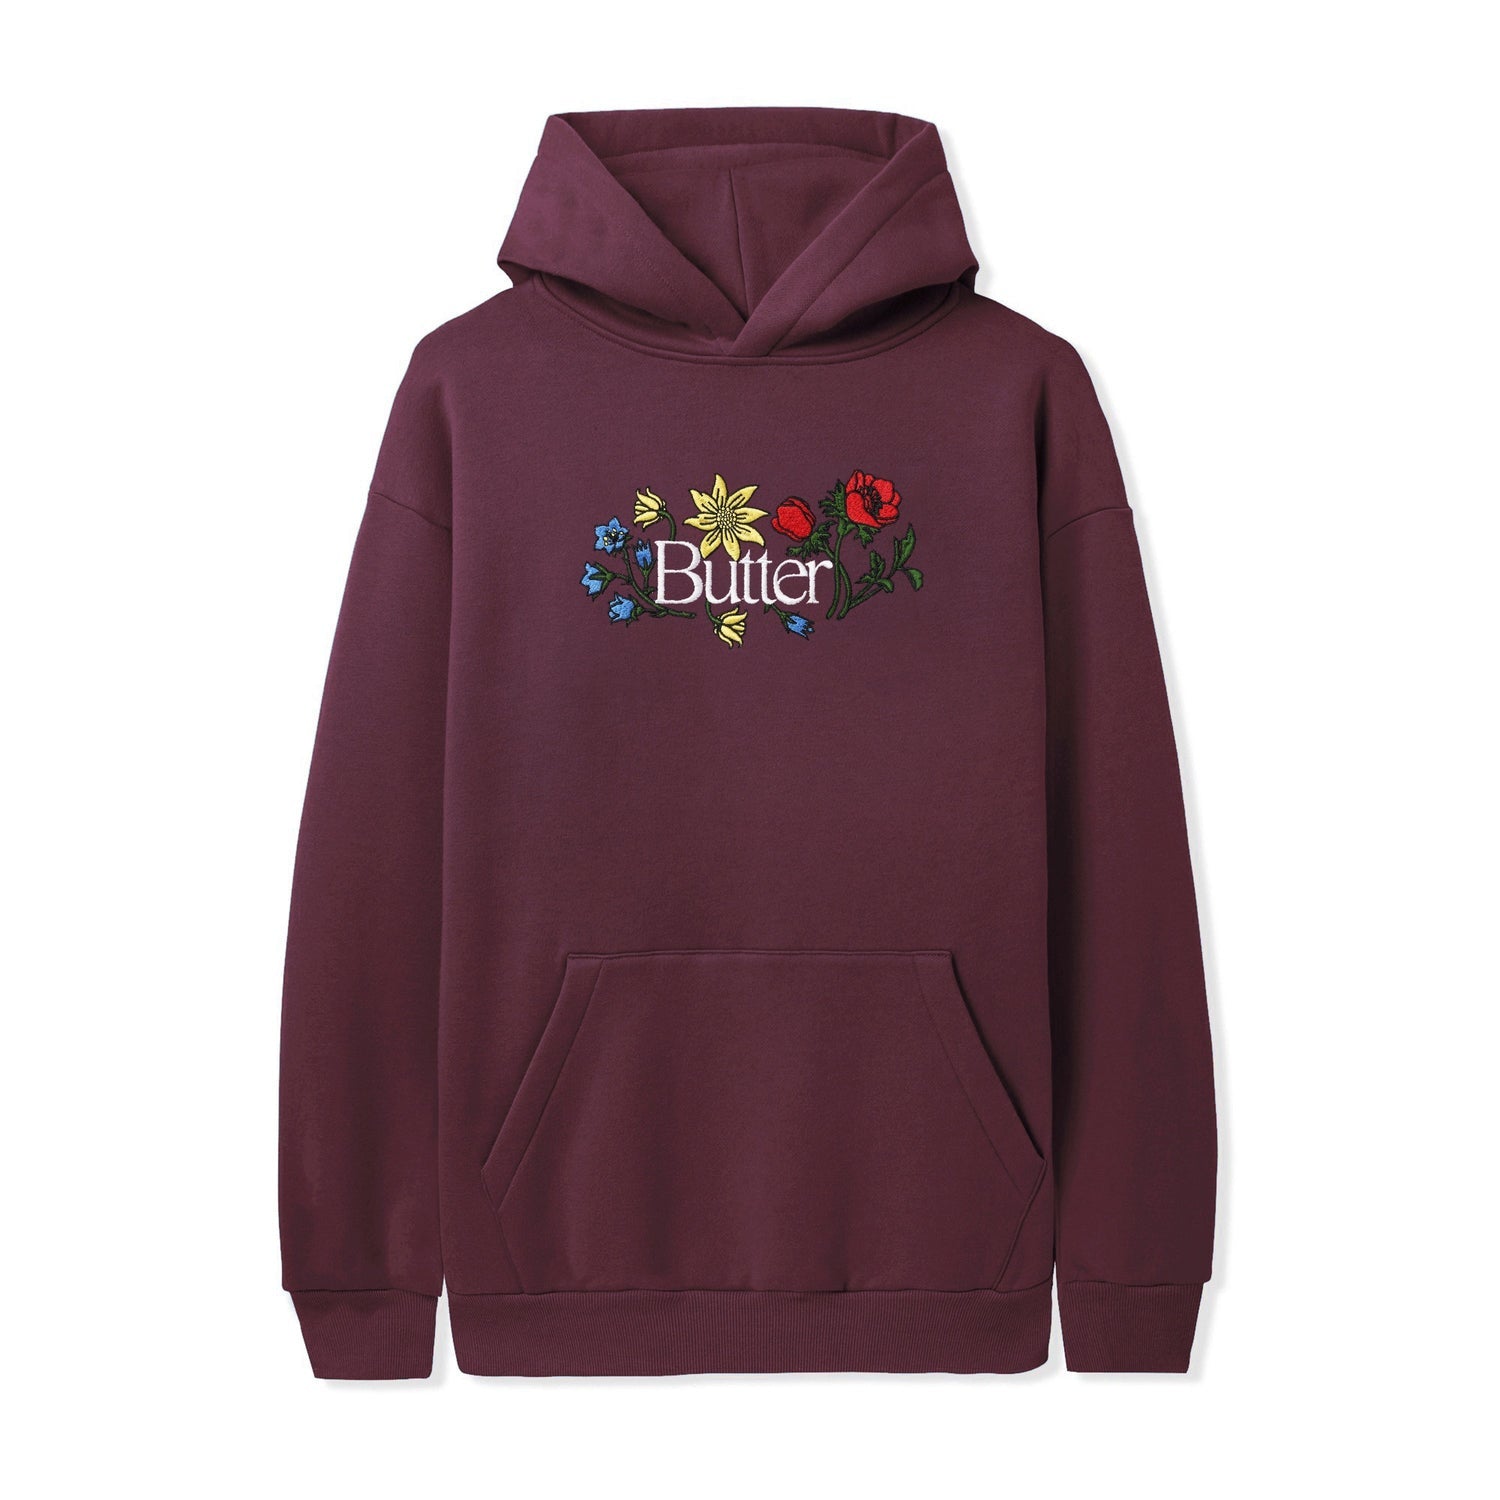 Butter Goods Floral Embroidered Hooded Sweatshirt - Wine